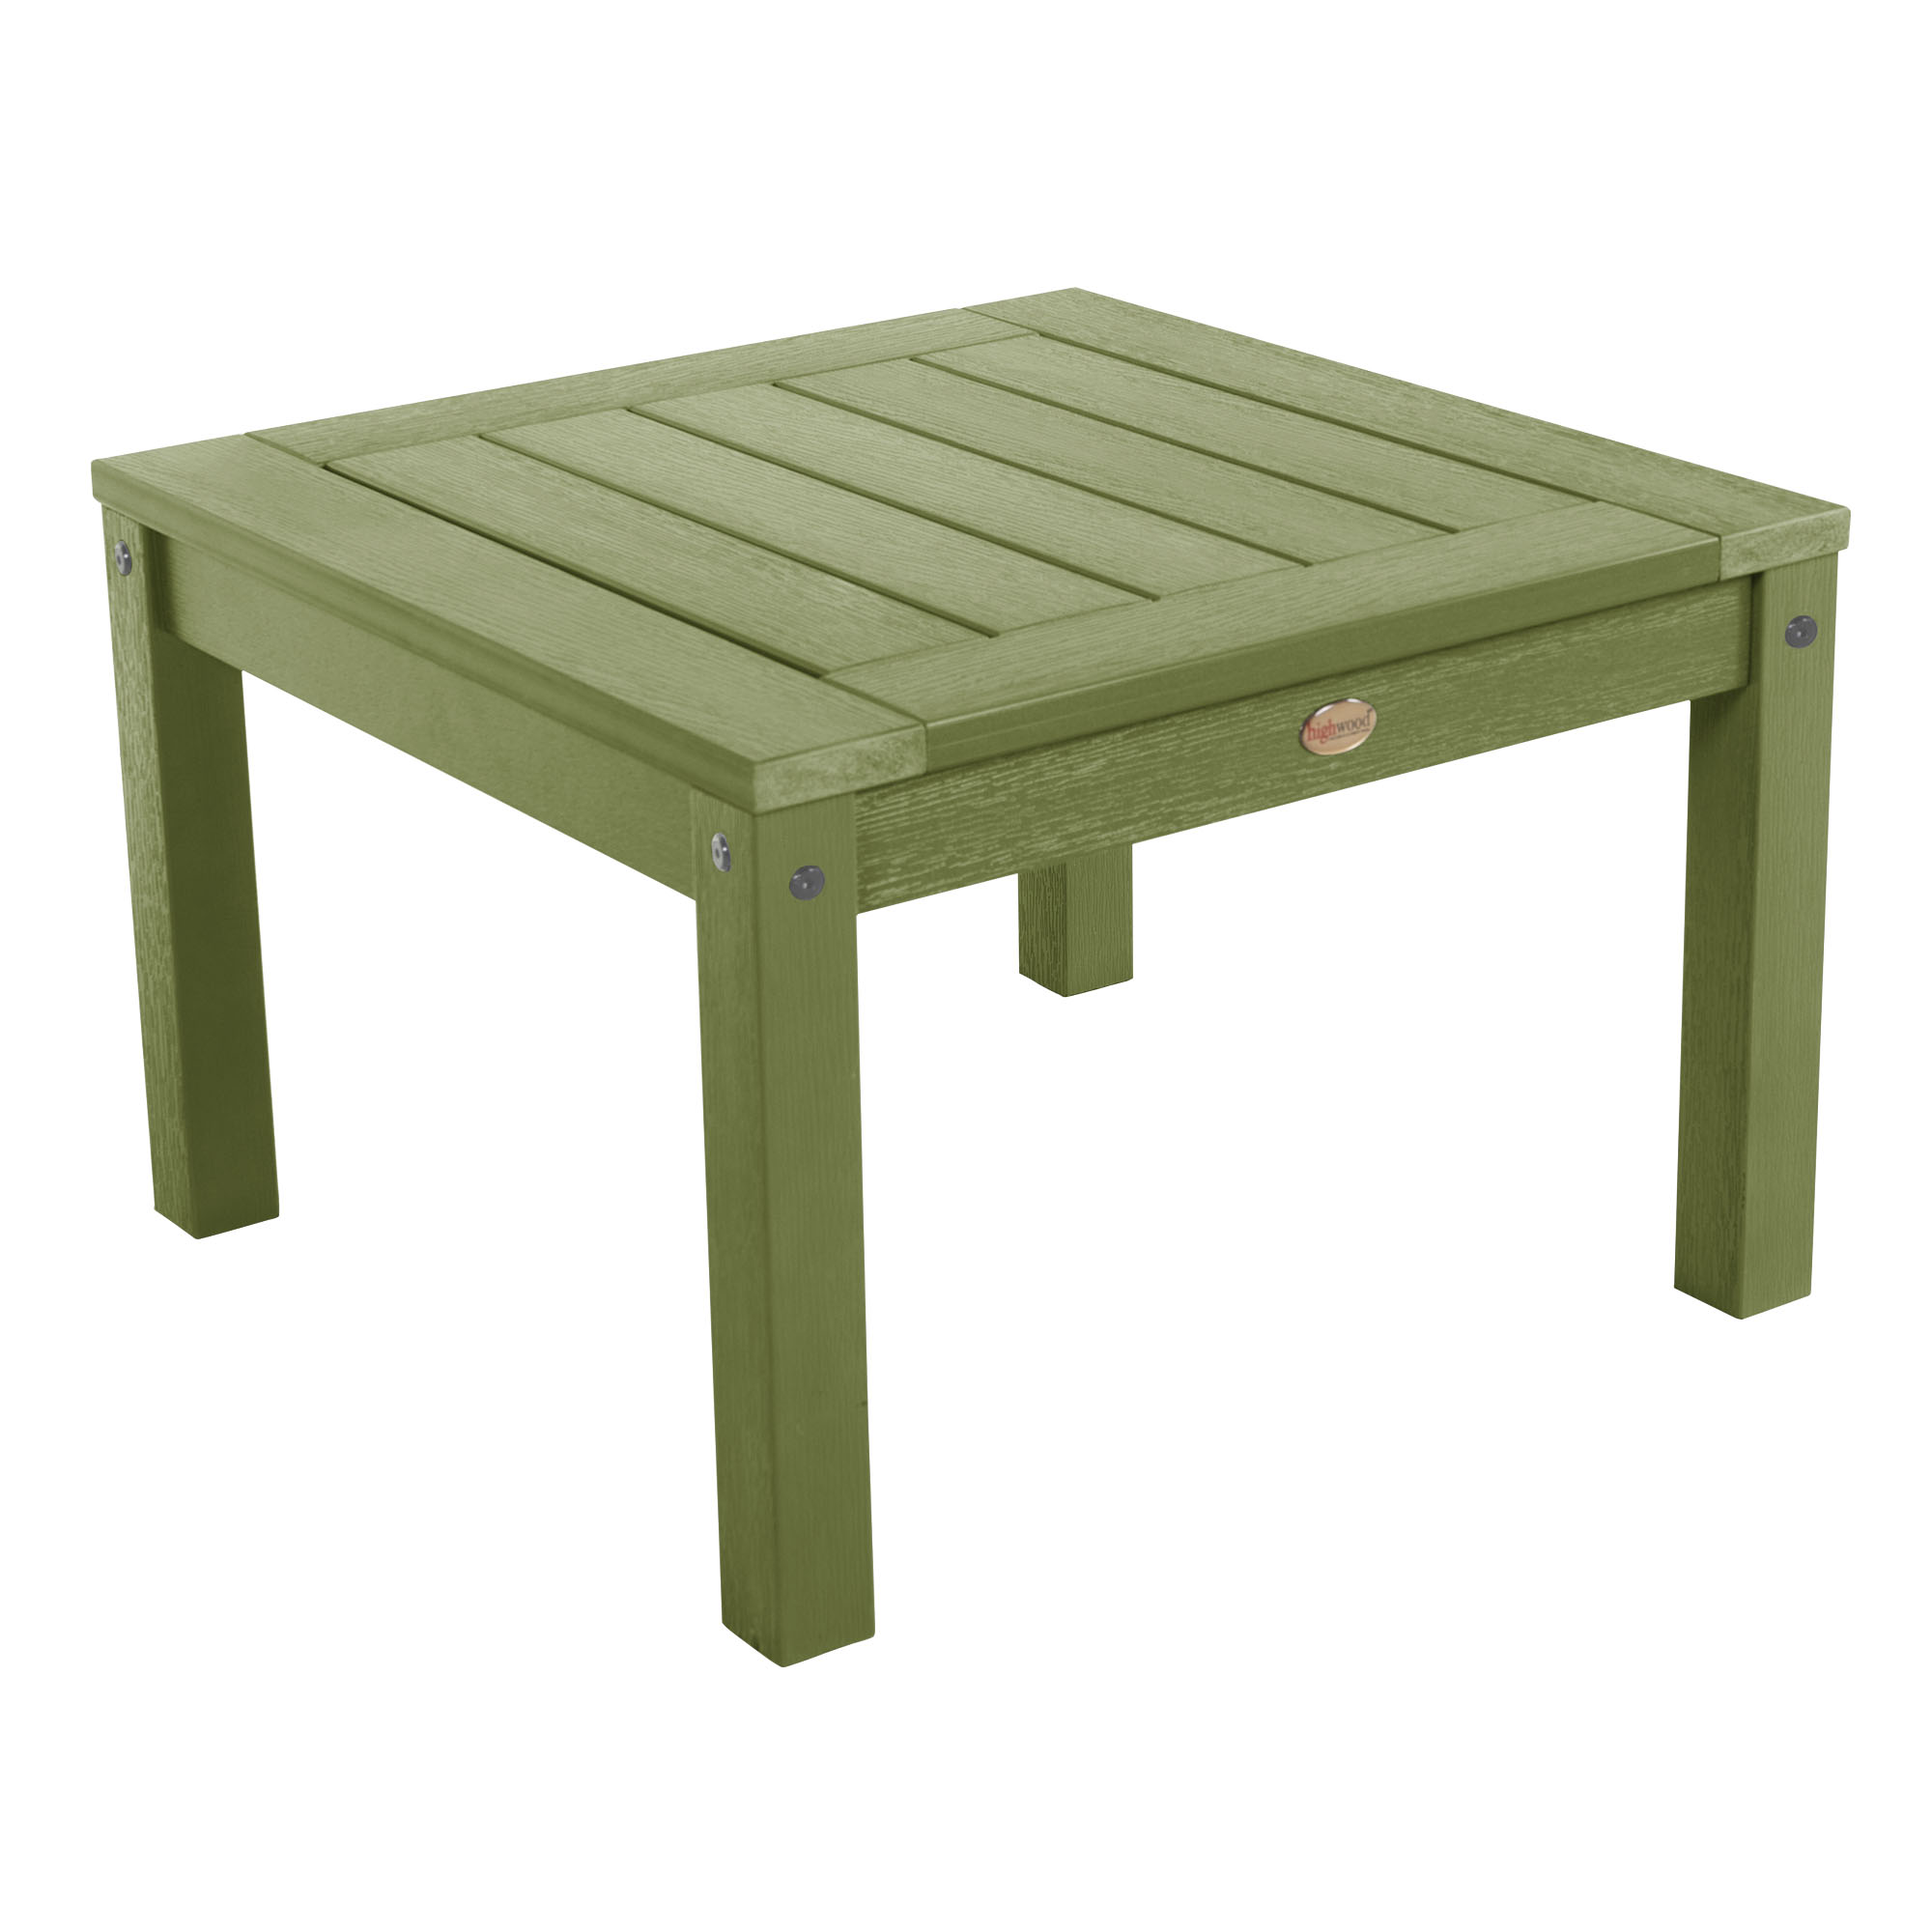 2 Lehigh Garden Chairs with 1 Square Side Table - image 3 of 16